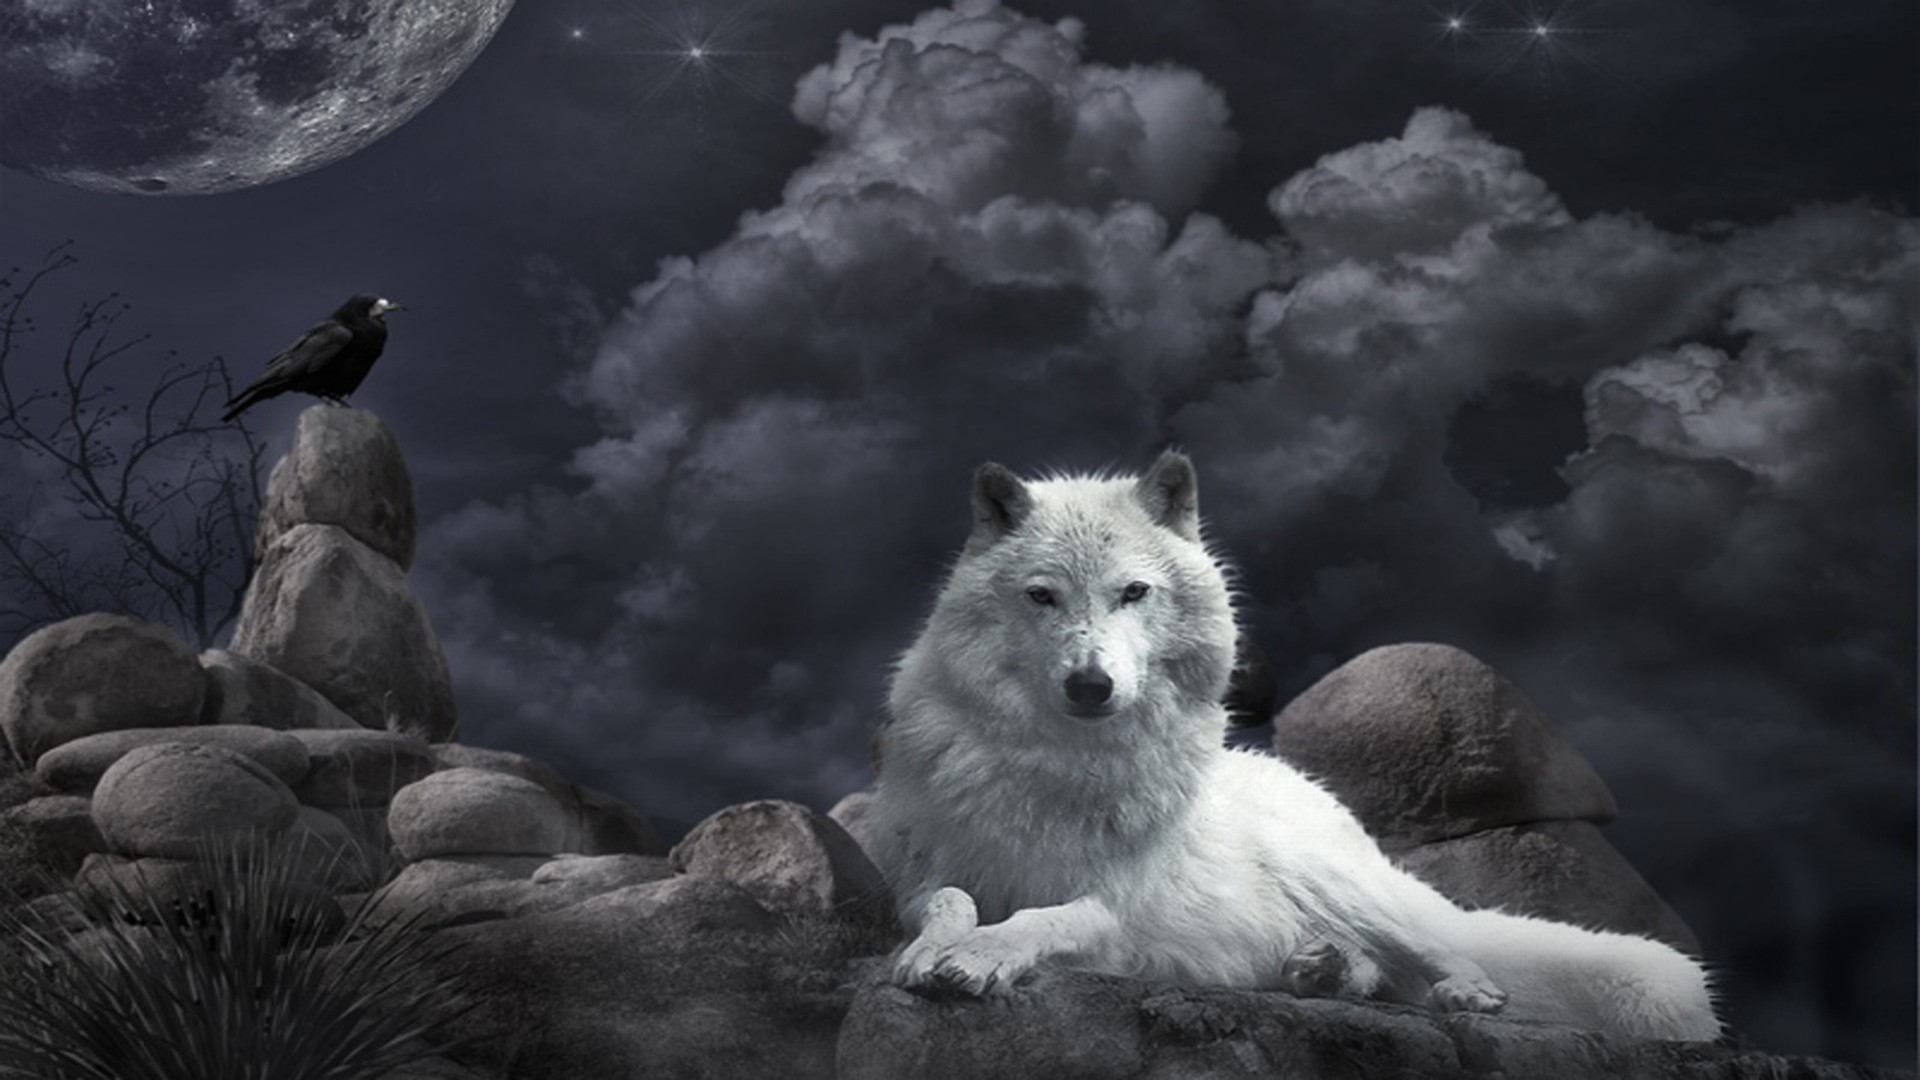 Pin by Branco Lone Wolf on Lobos  Wolf pictures Animal spirit guides  Wolf background